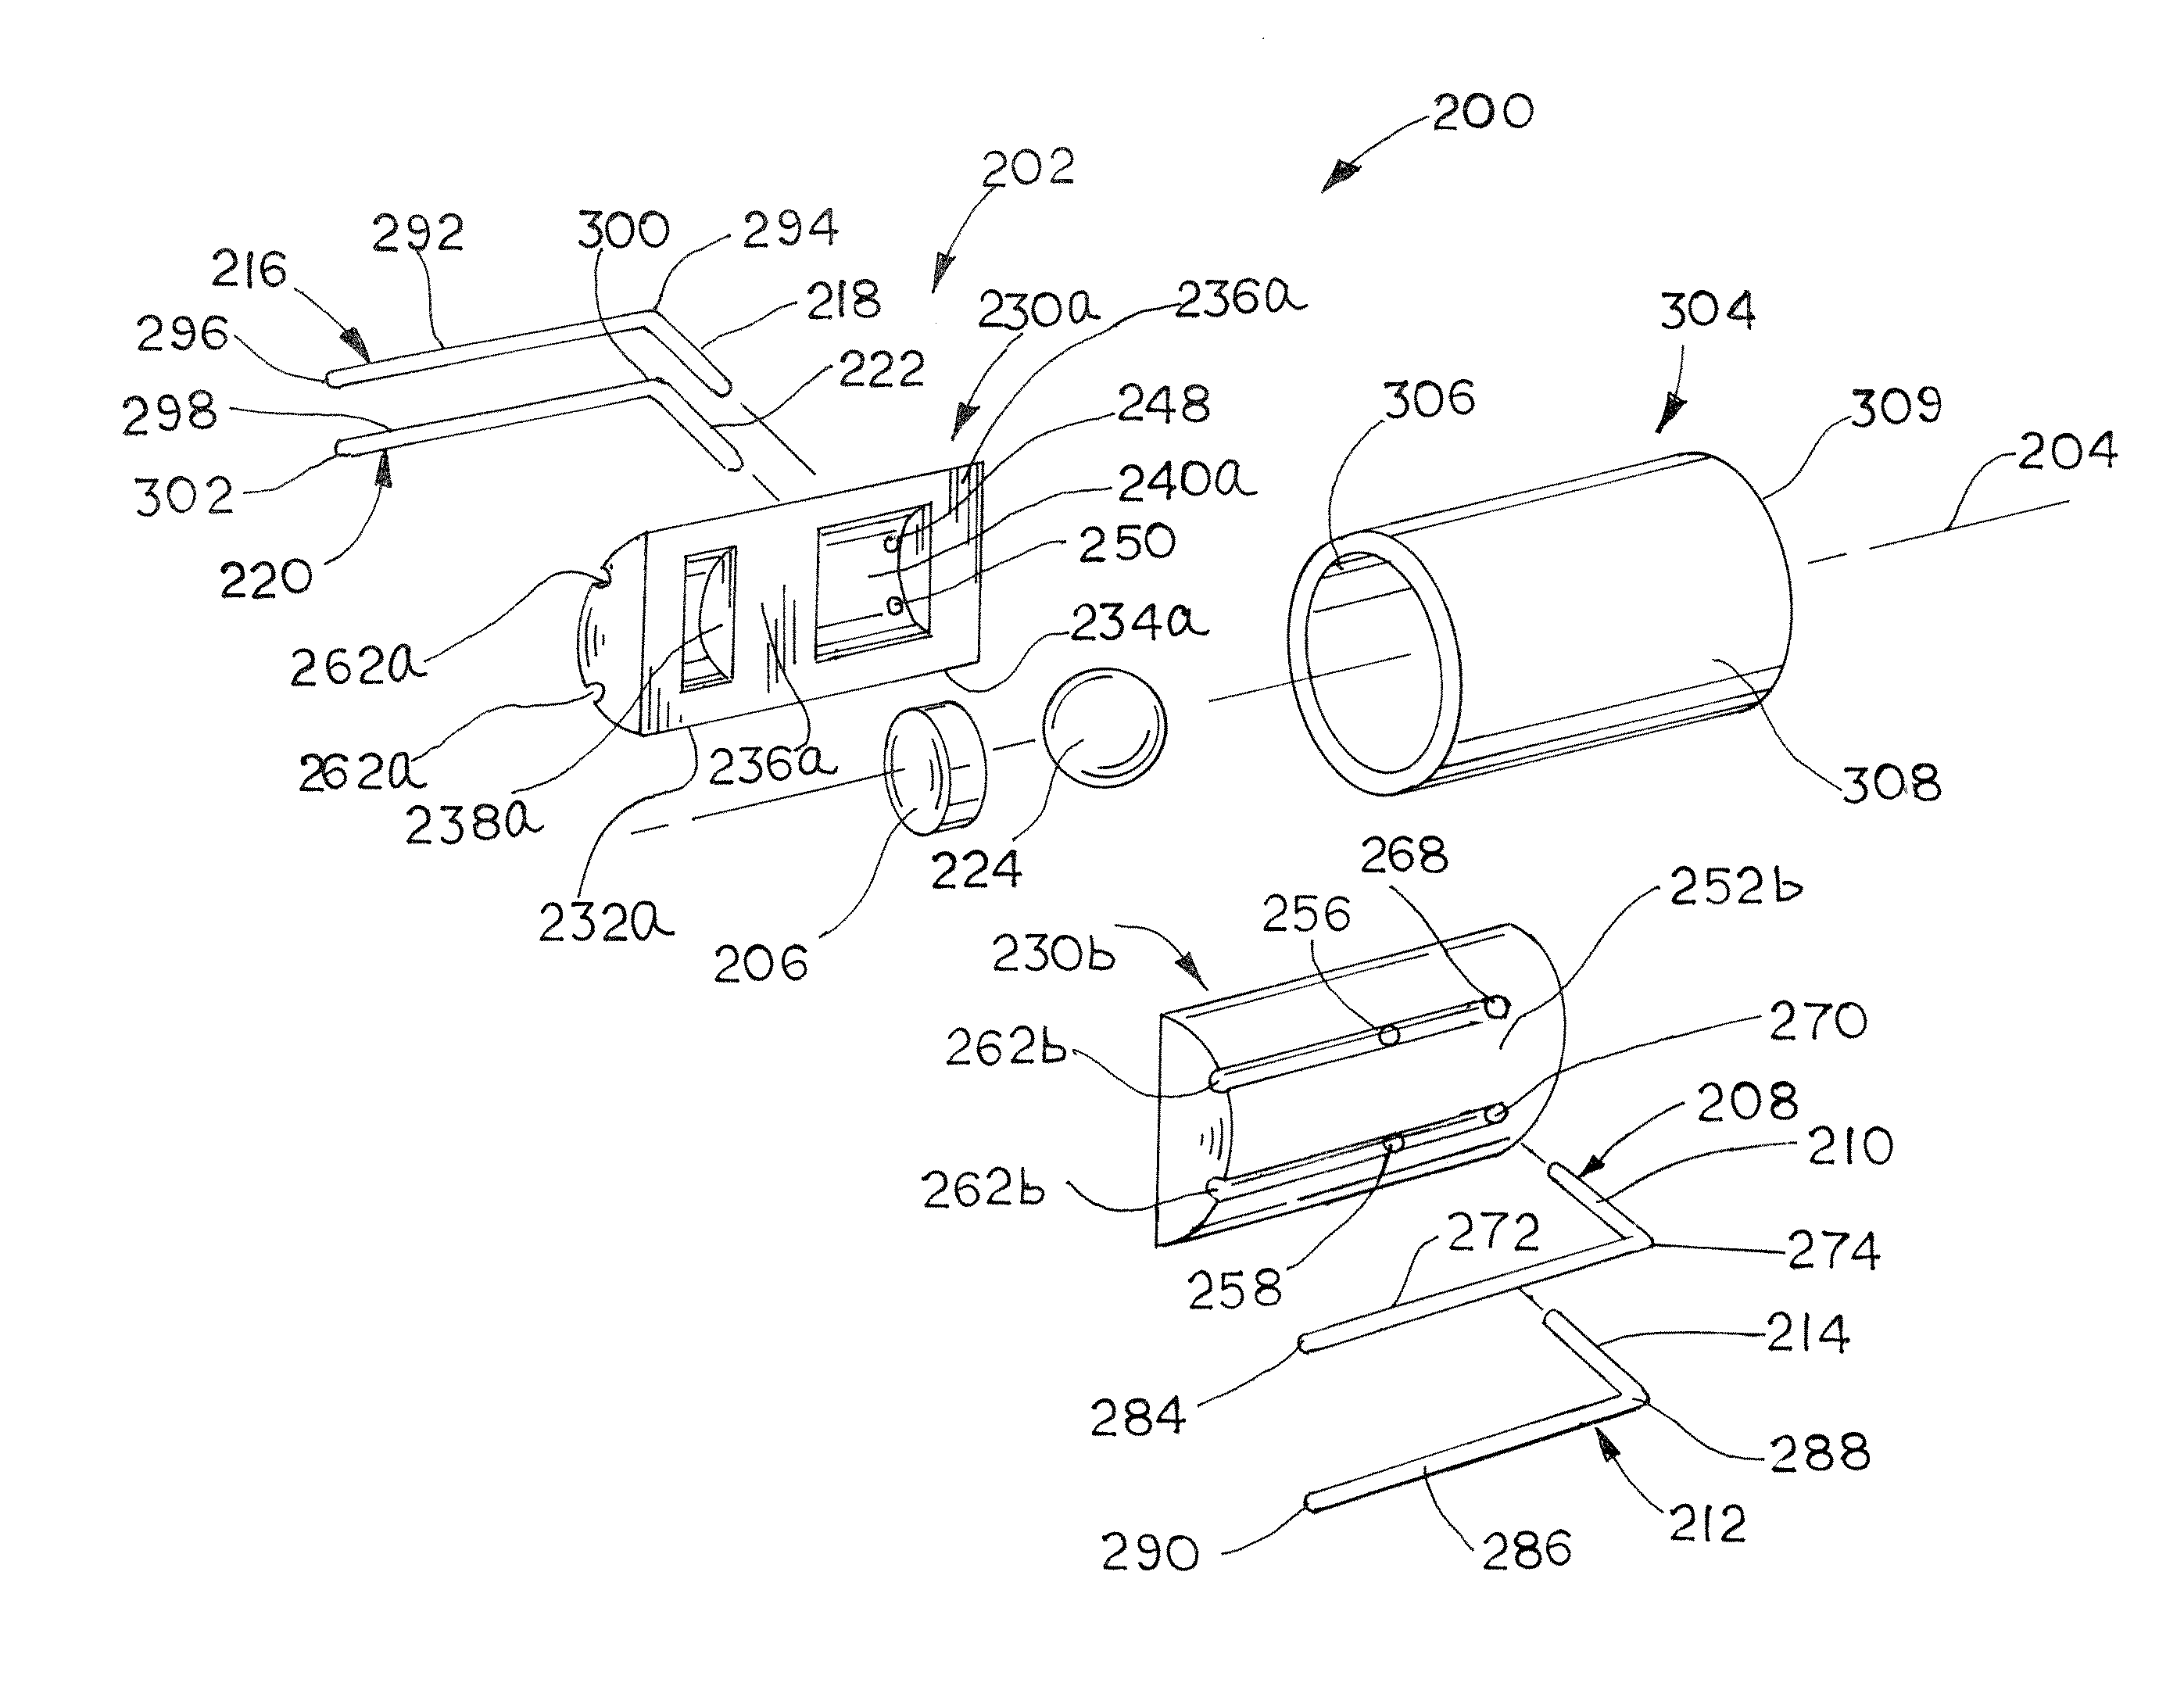 Magnetically-triggered proximity switch